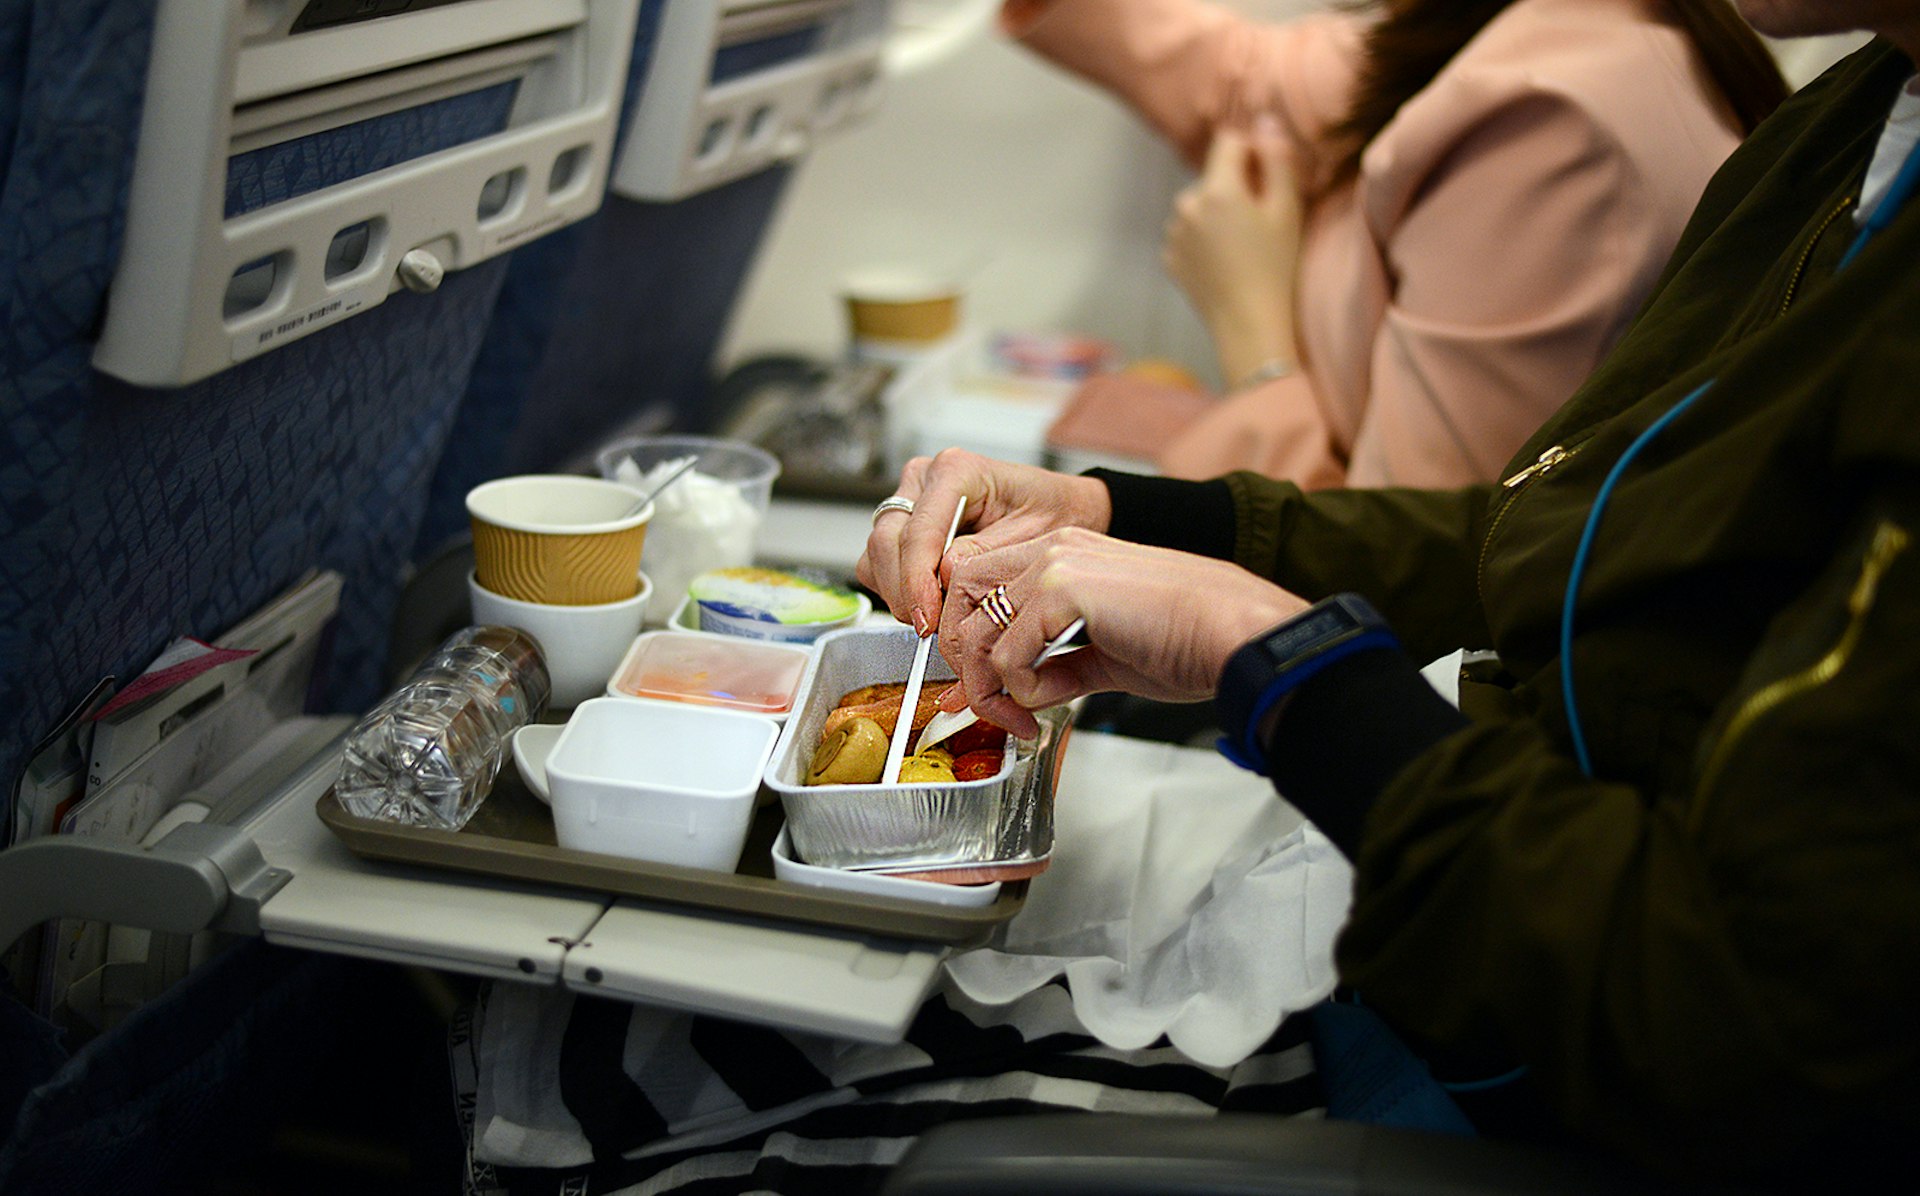 A woman eating an in-flight meal on a plane © Cheryl Chan / Getty Images